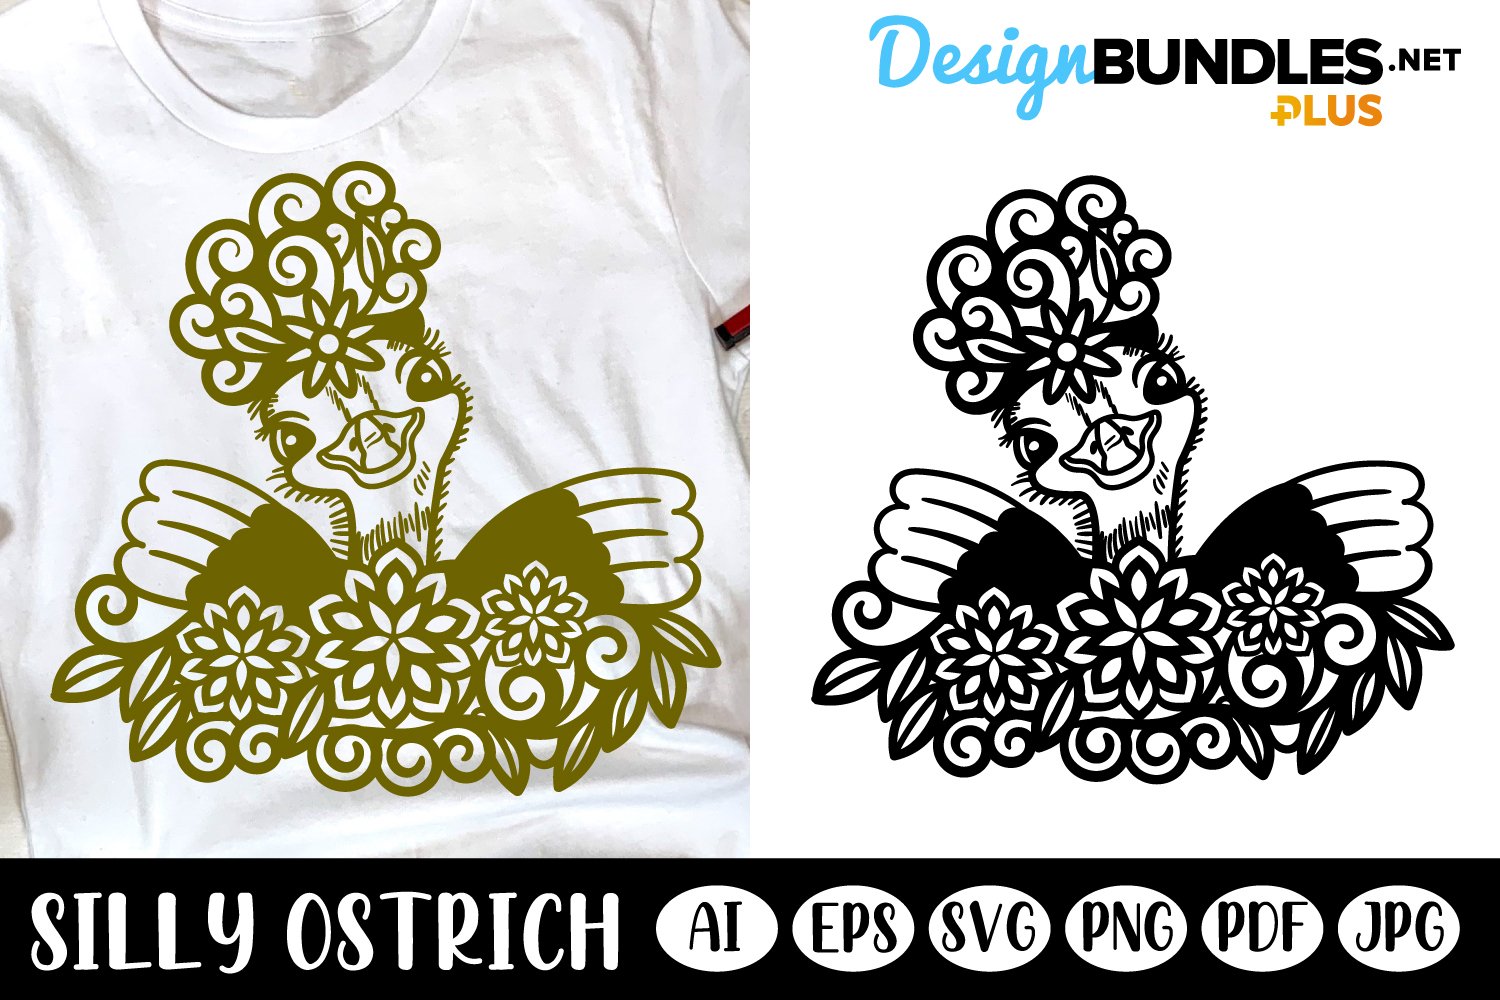 Two color options of ostrich.